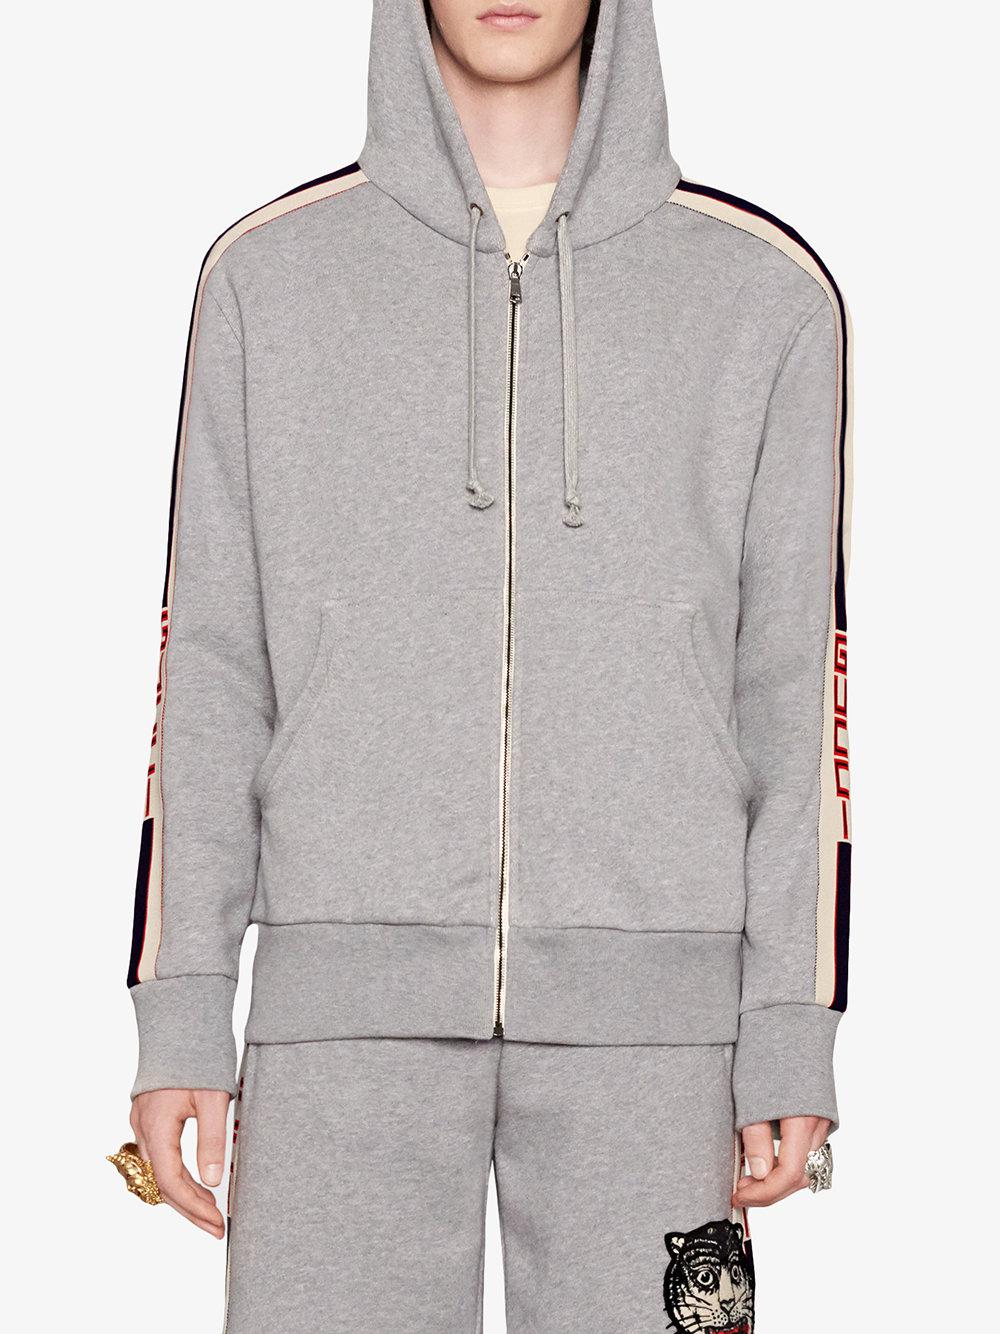 Gucci Cotton Hooded Zip-up Sweatshirt With Stripe in Grey (Gray) for Men -  Lyst